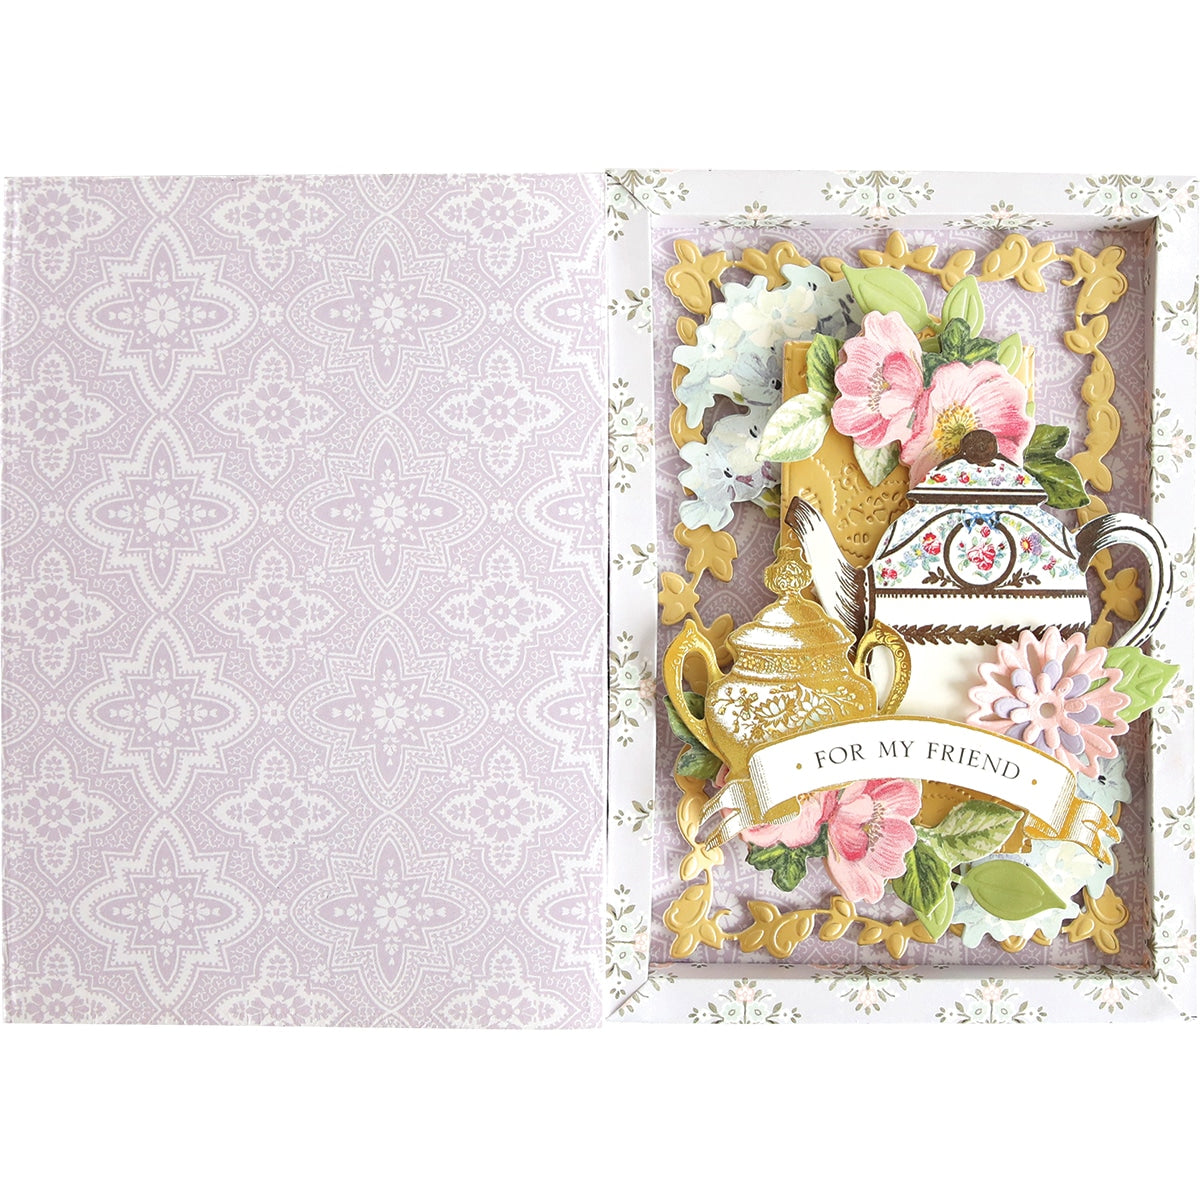 a card with a teapot and flowers on it.